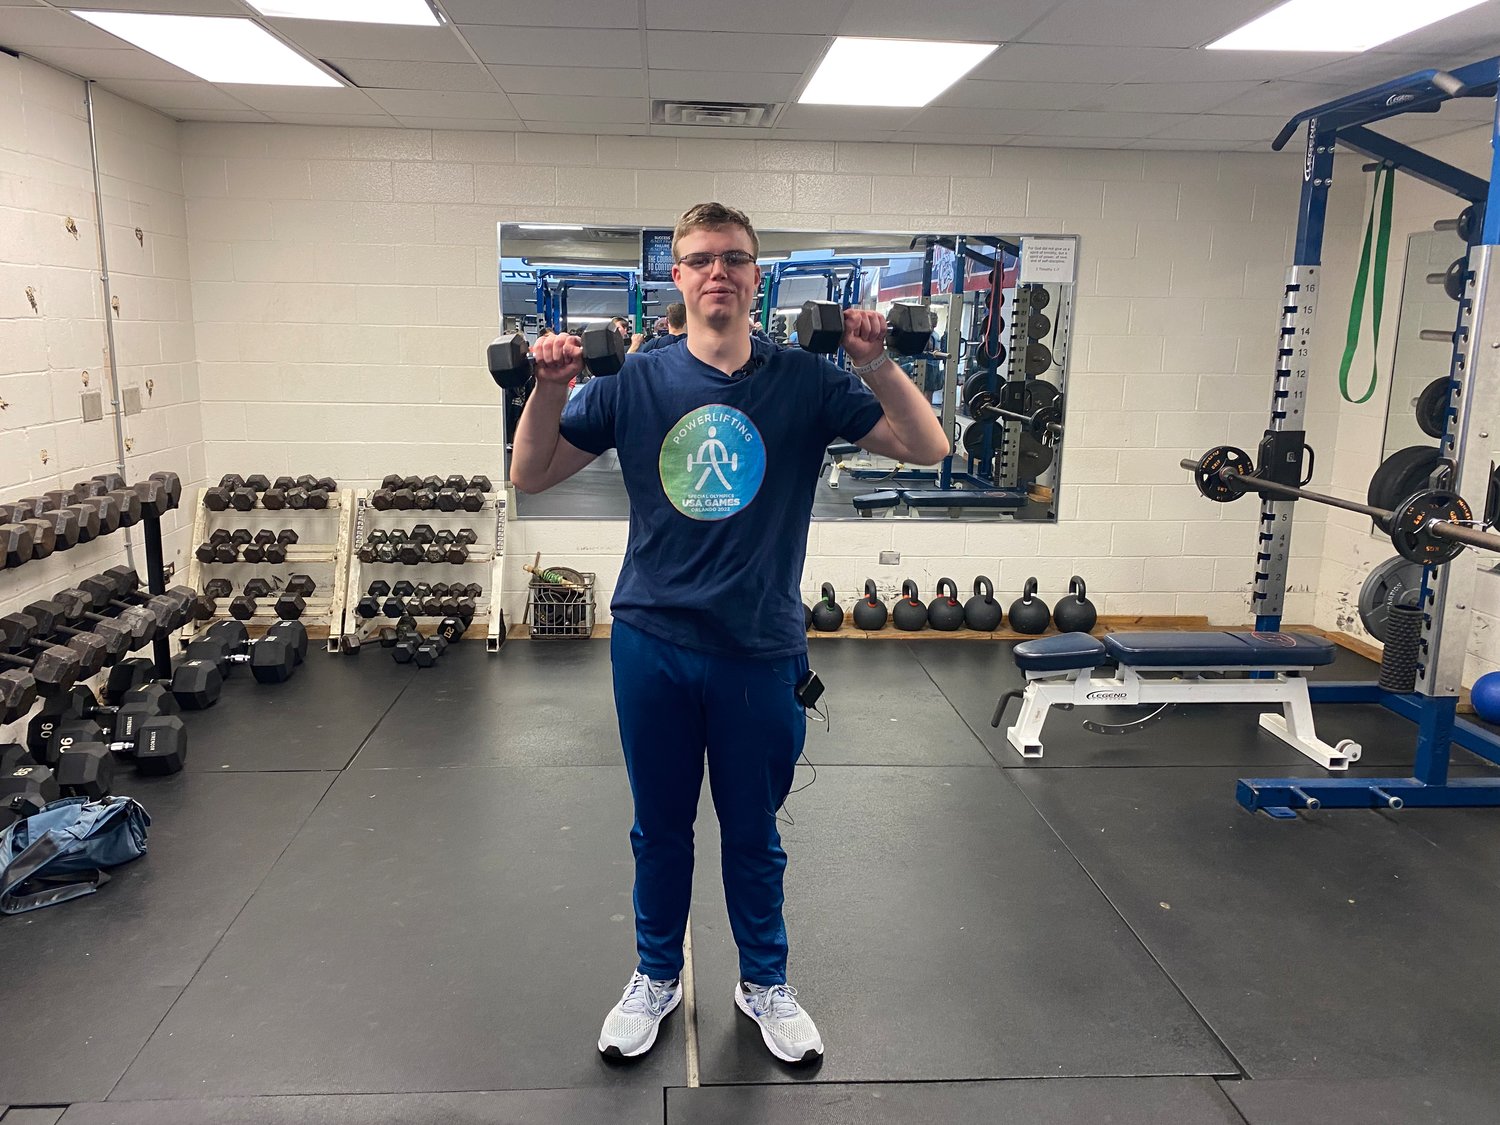 Jett Chilton works out in front of reporters on Wednesday. Jett will compete in weightlifting events squats, deadlift and bench press at the June 2022 Special Olympics USA Games in Florida.